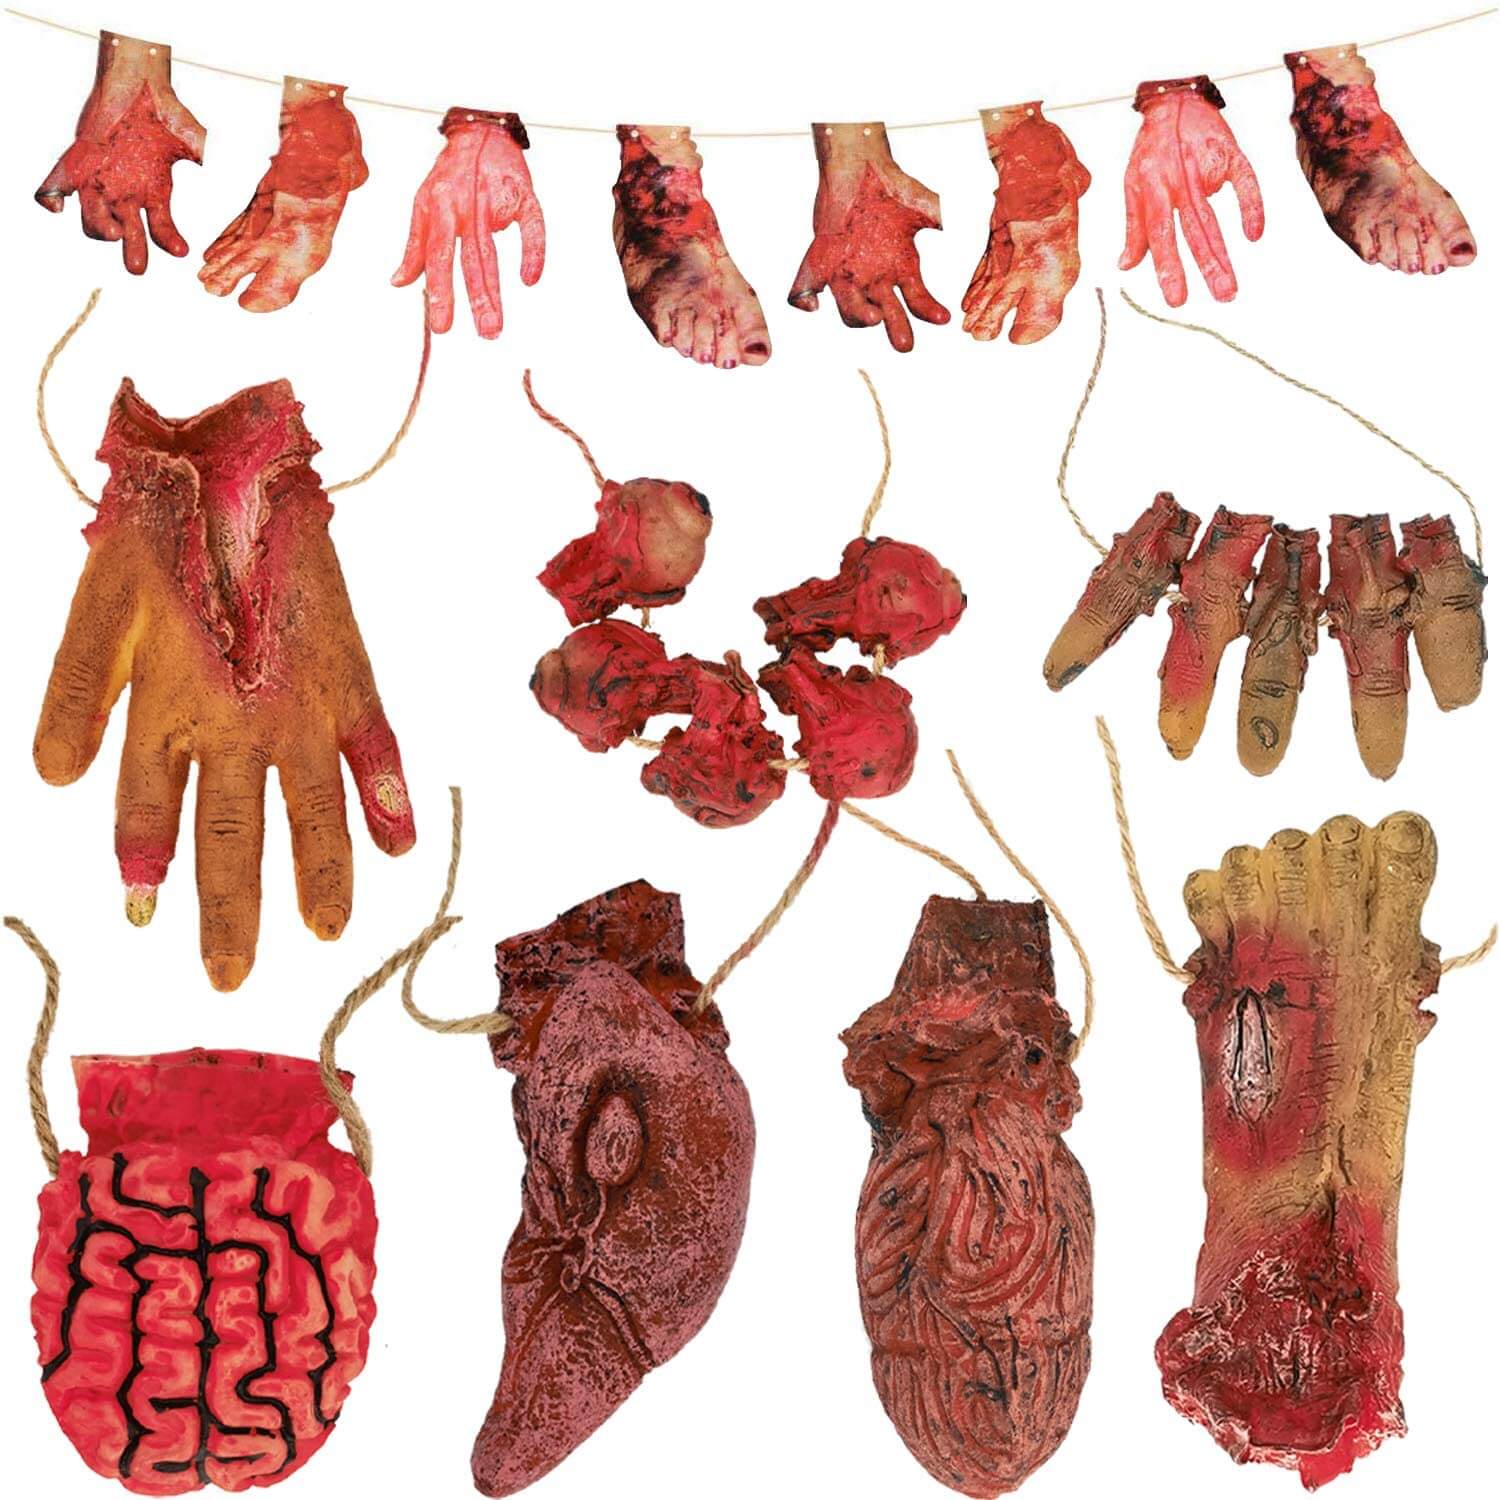 Fake body parts and organs including Hanging hands, feet, brain, liver and fingers